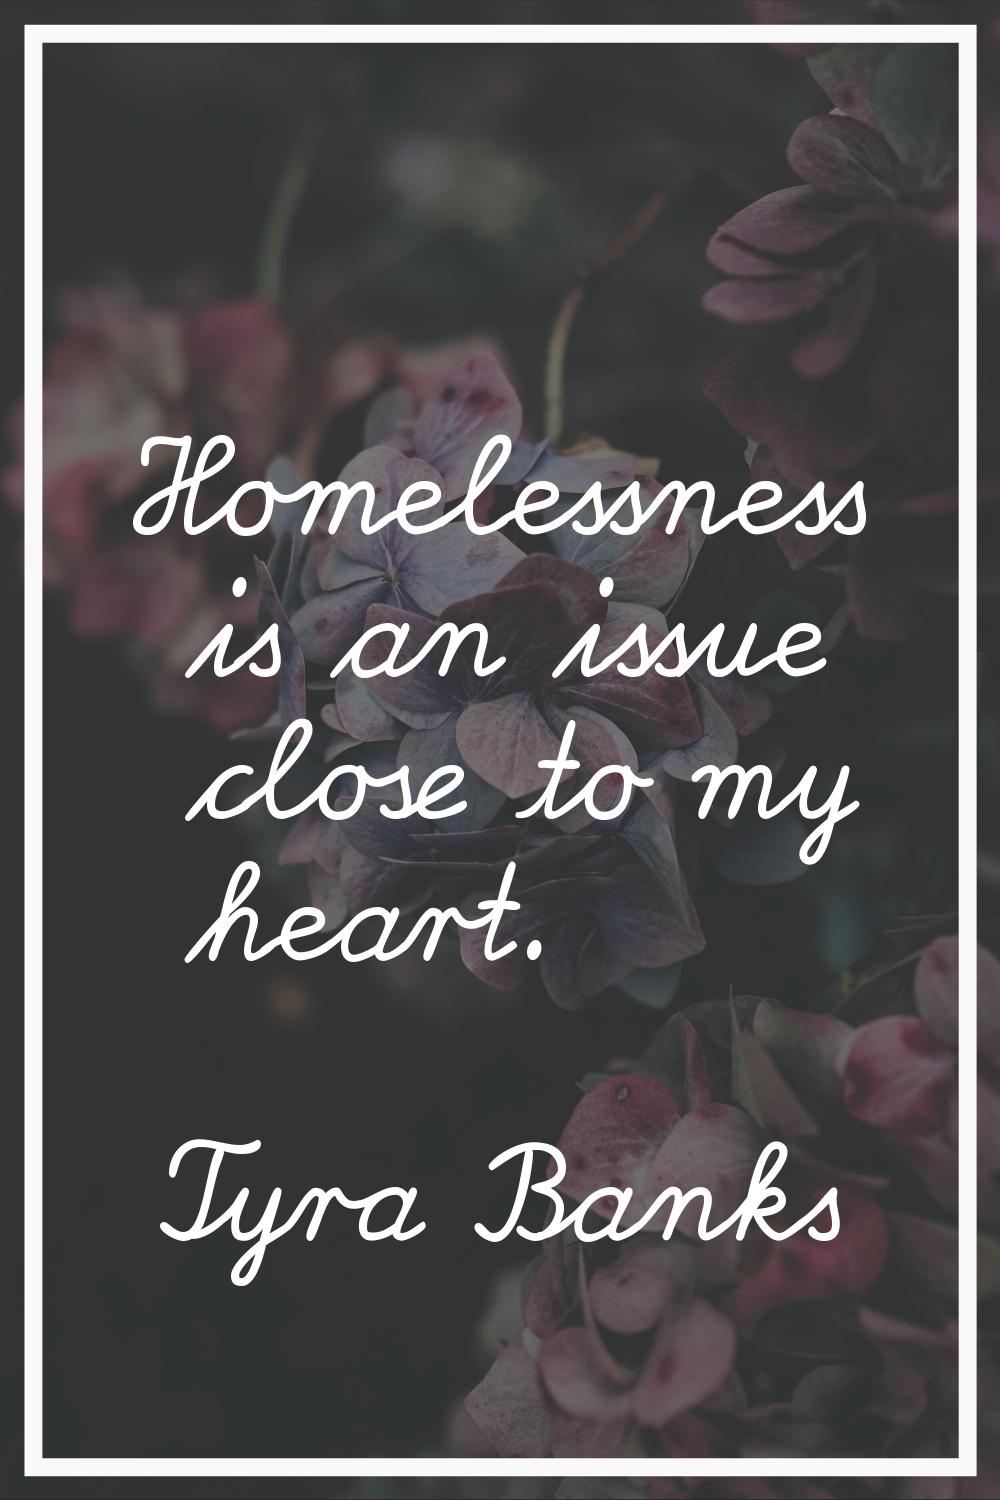 Homelessness is an issue close to my heart.